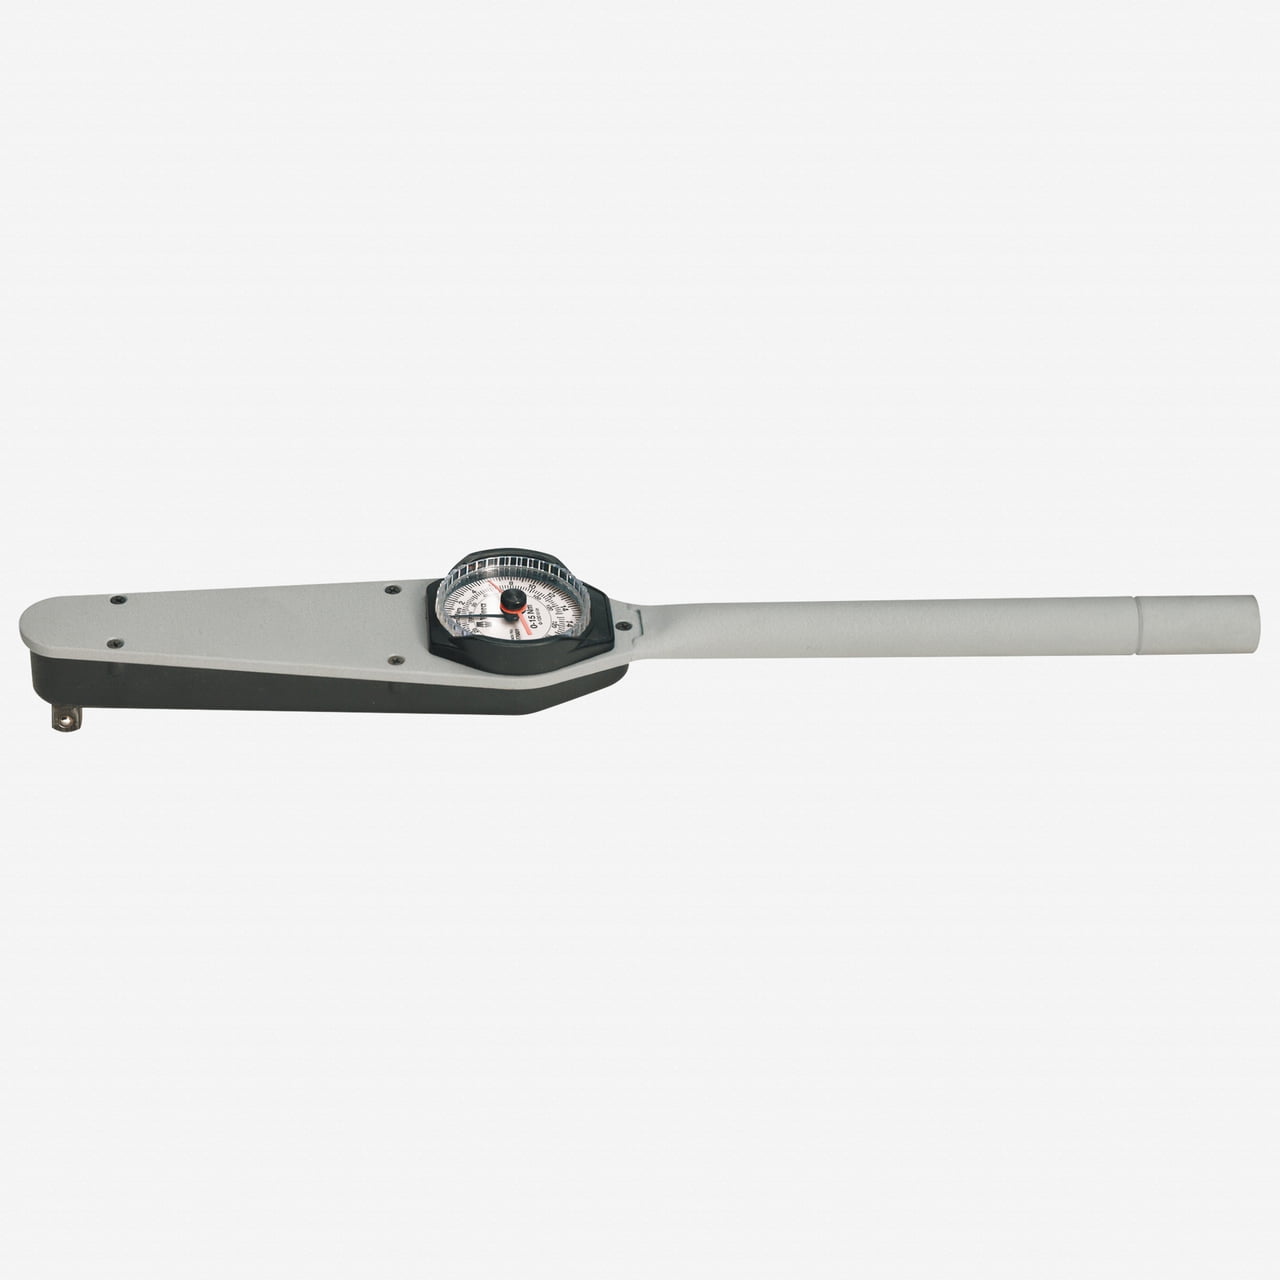 Wera 077002 7113 B DS 0-70 Nm Dial Torque Wrench with Drag Pointer 3/8